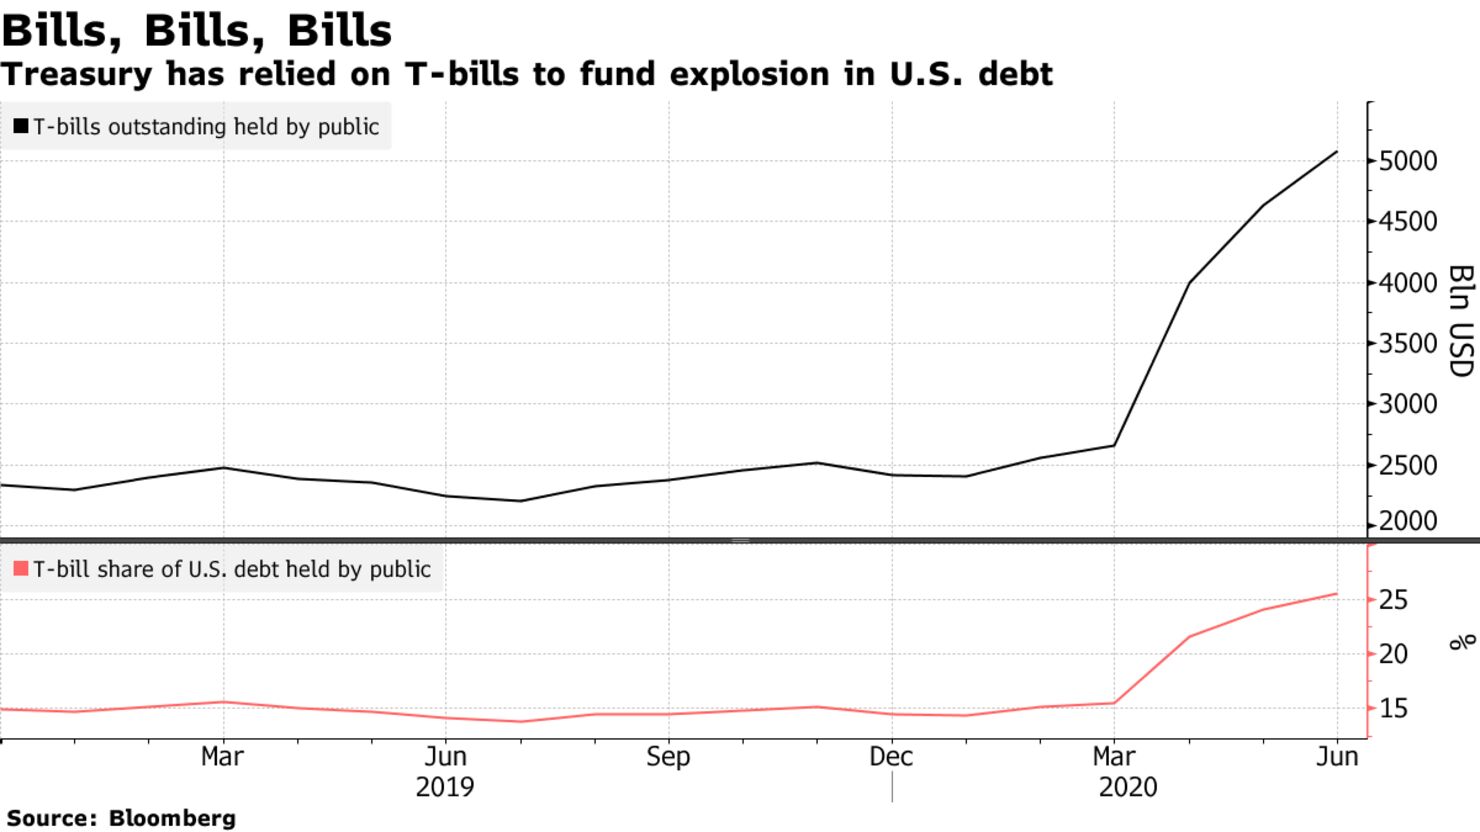 Treasury has relied on T-bills to fund explosion in U.S. debt